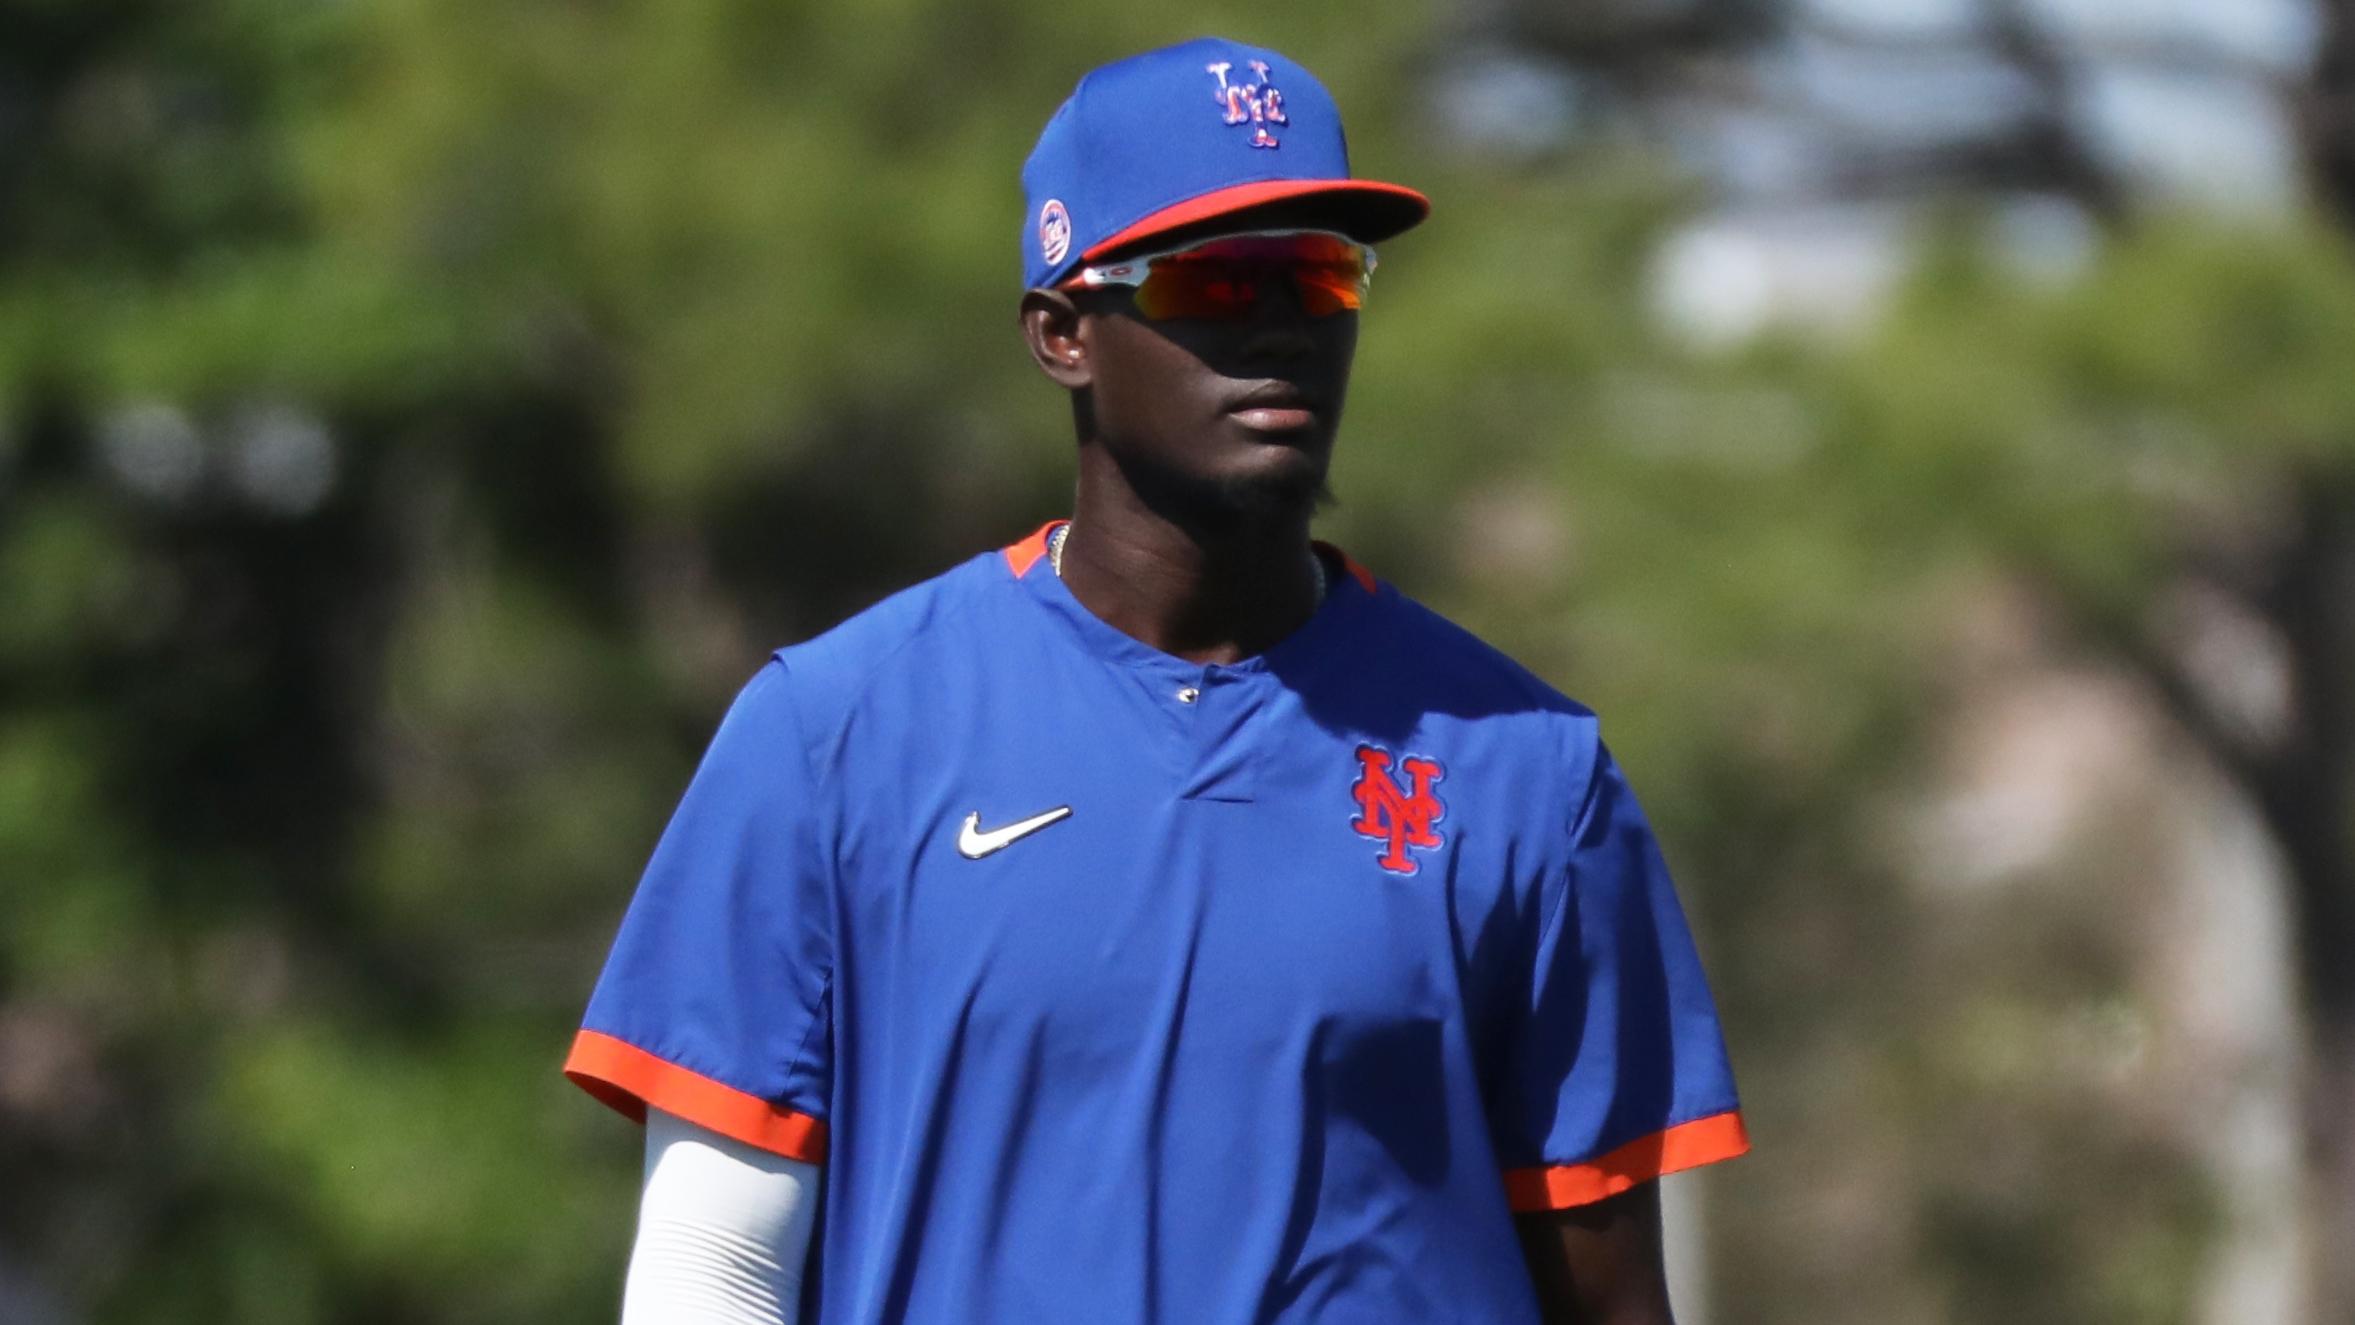 Mets prospect Ronny Mauricio at 2021 spring training in Port St. Lucie, Fla. / Rob Carbuccia/SNY